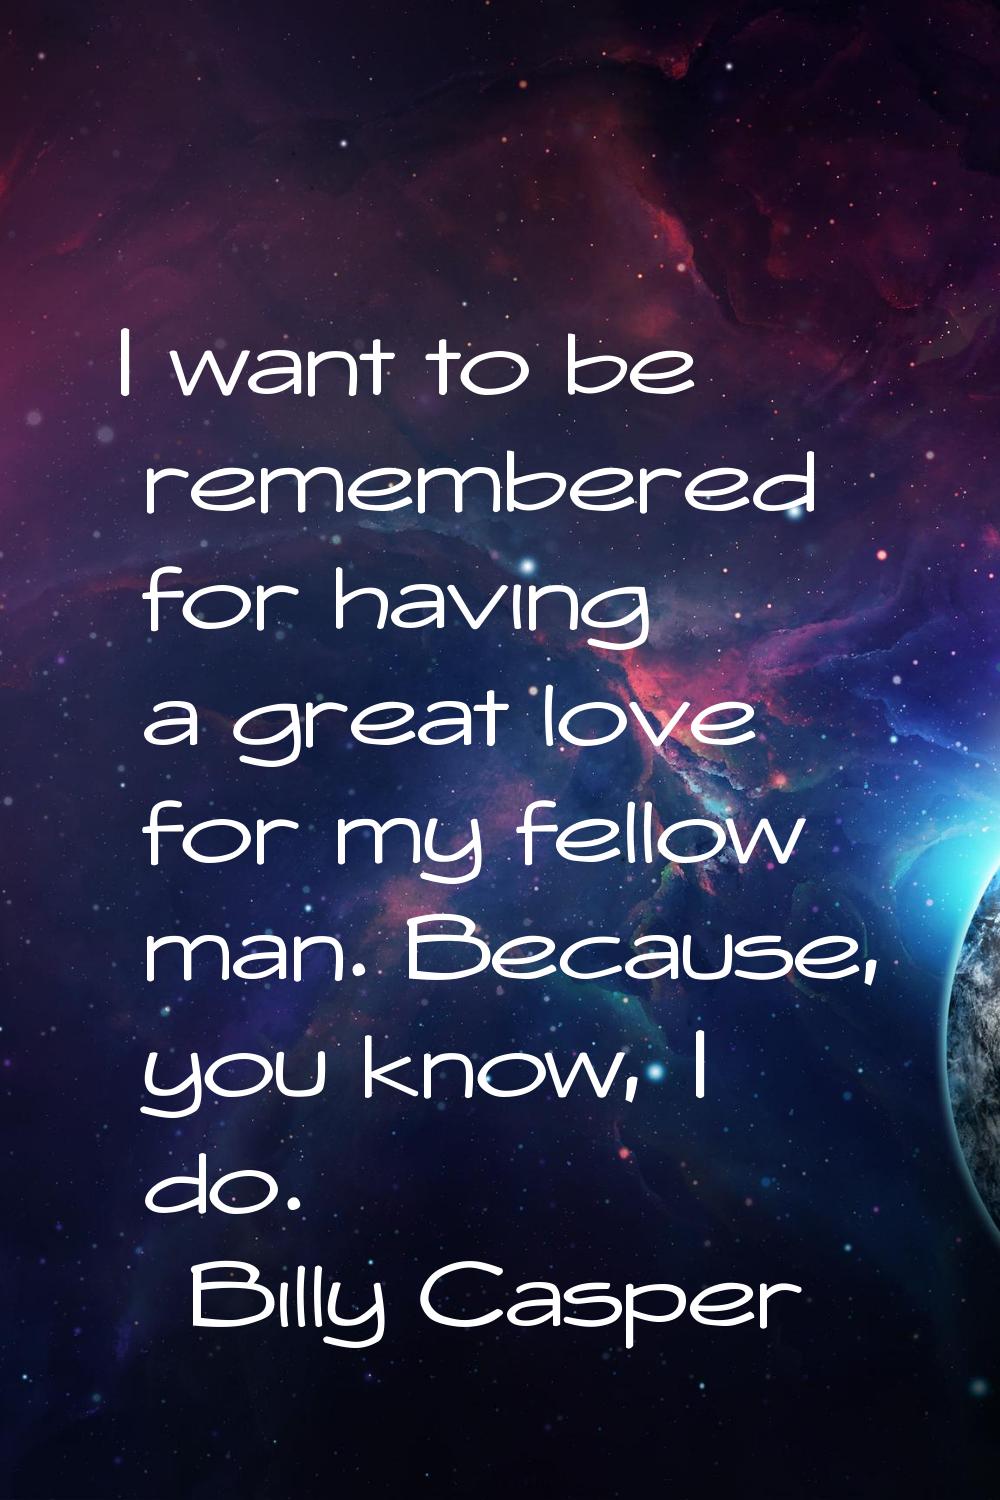 I want to be remembered for having a great love for my fellow man. Because, you know, I do.